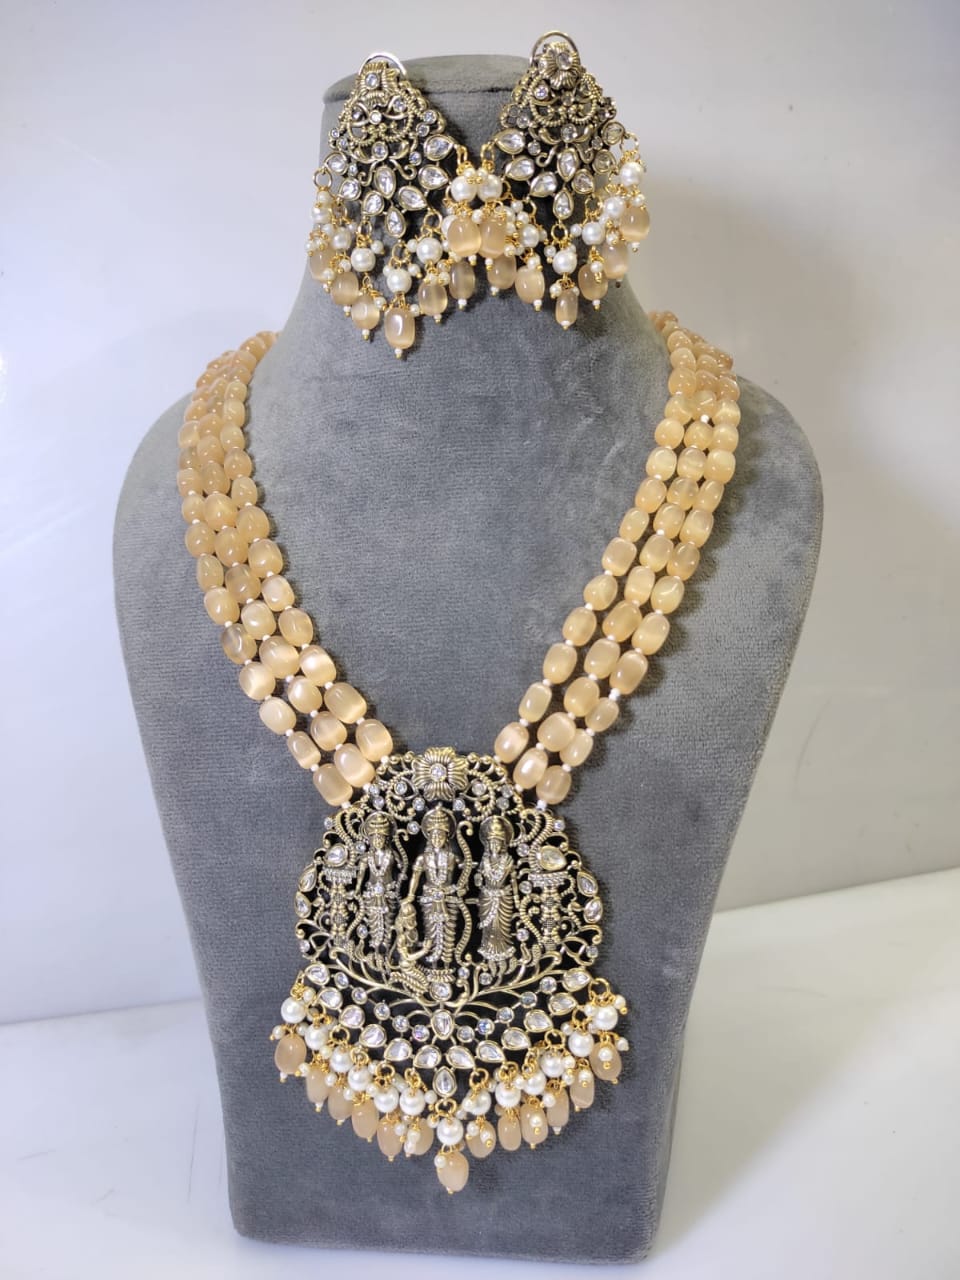 Online Shopping - Artificial or Imitation Jewellery, Women Clothing